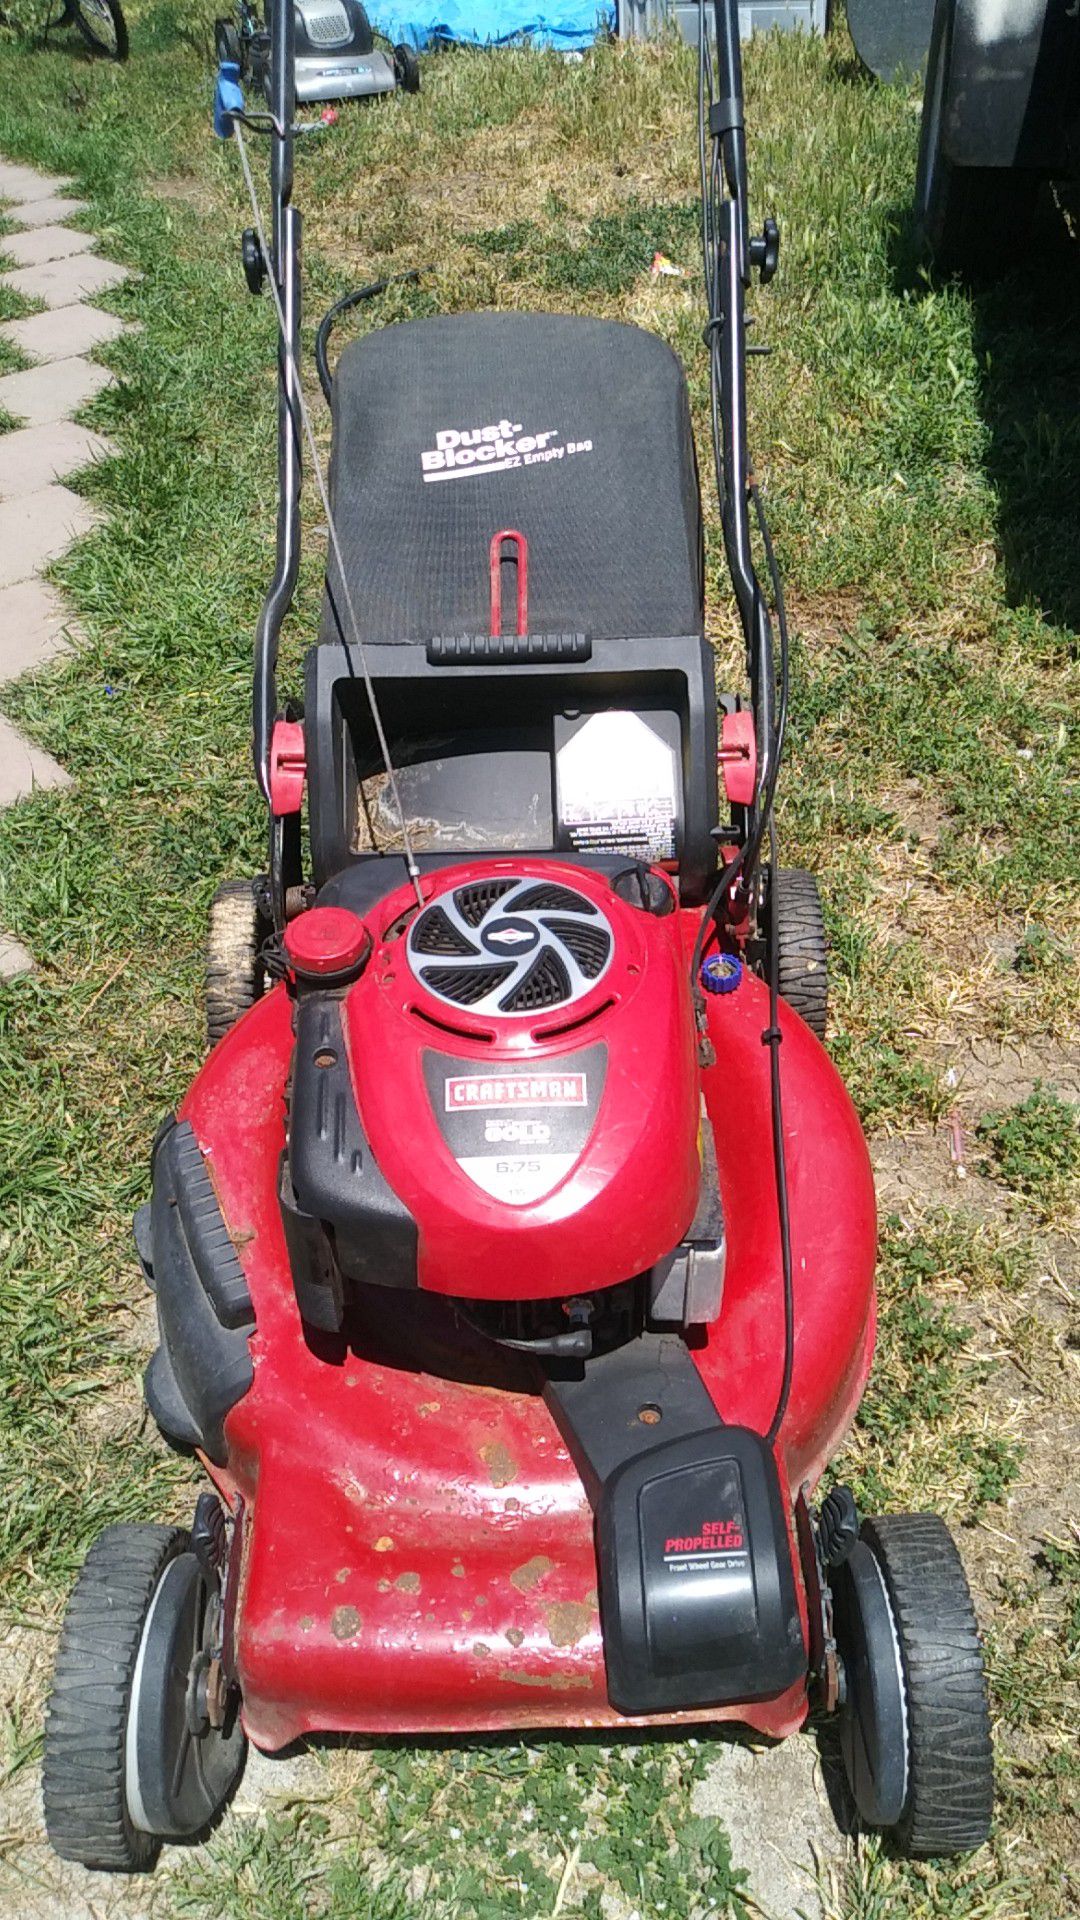 Craftsman front drive lawn mower